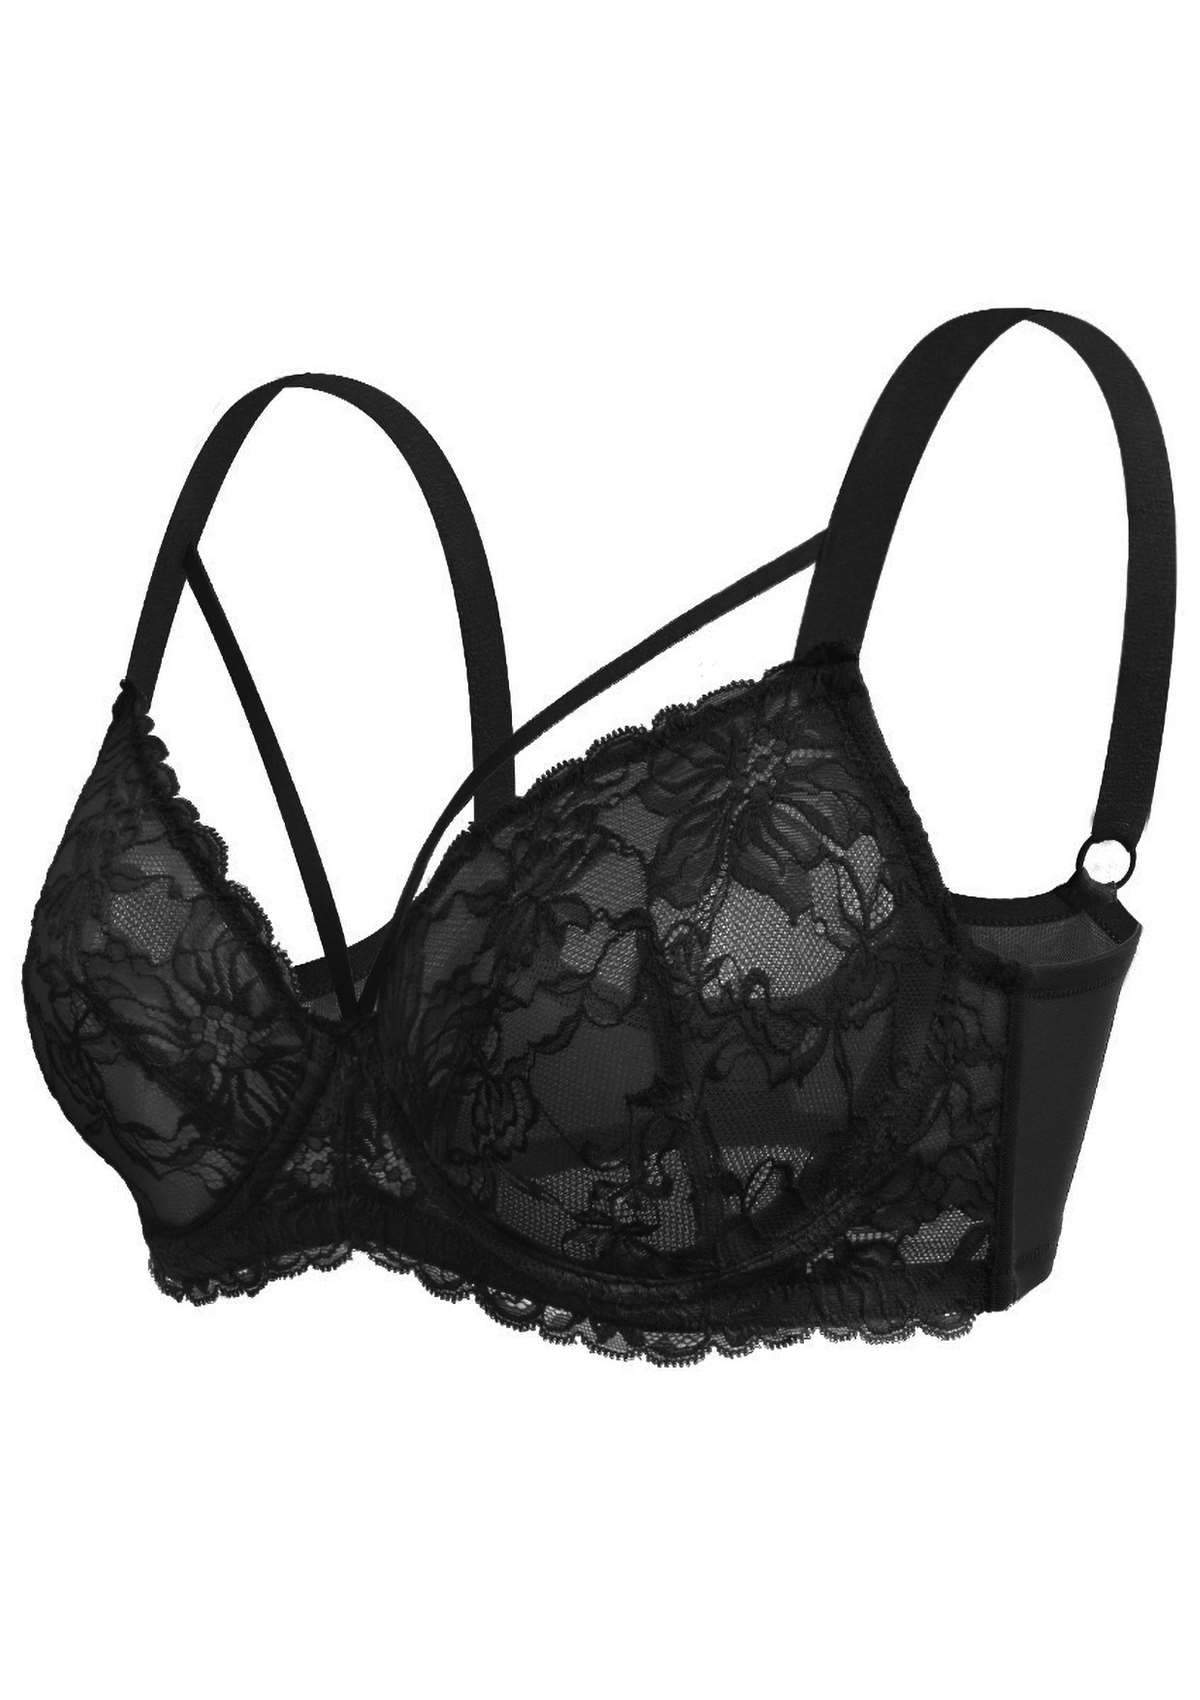 HSIA Pretty In Petals Bra - Plus Size Lingerie For Comfrot And Support - Black / 36 / I